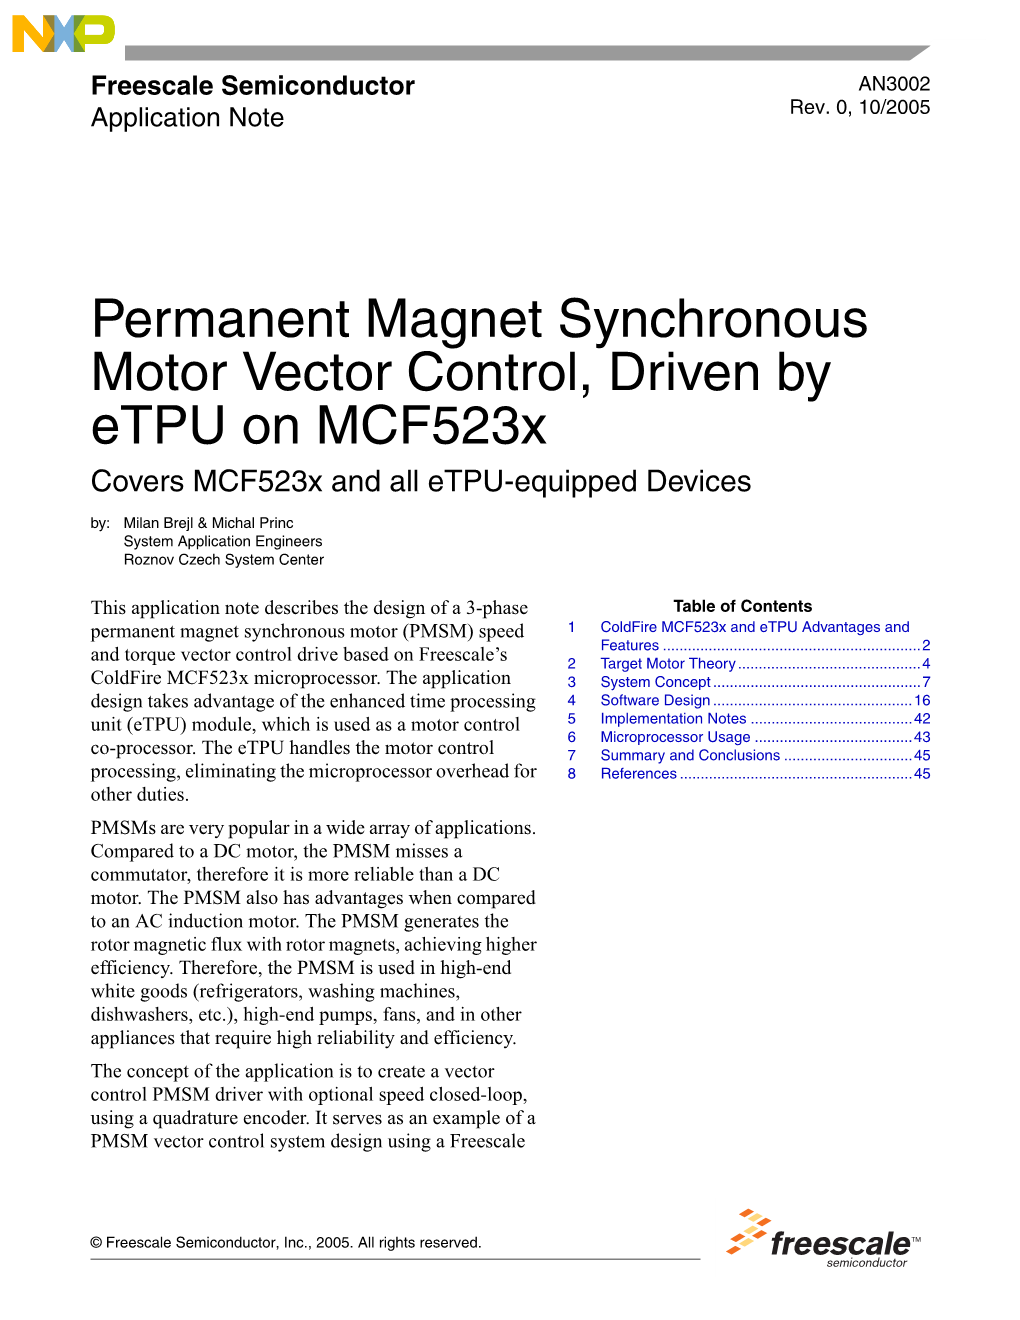 Permanent Magnet Synchonous Motor Vector Control, Driven by Etpu On